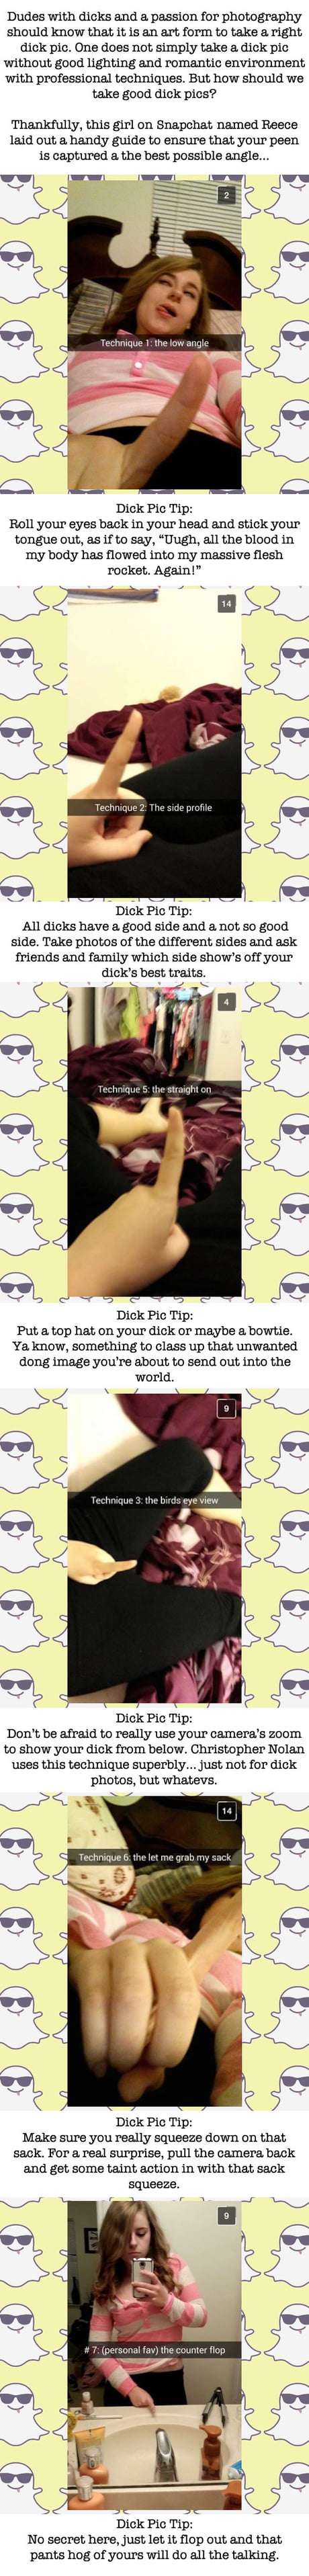 deep kishore add how to get dick pics on snapchat photo